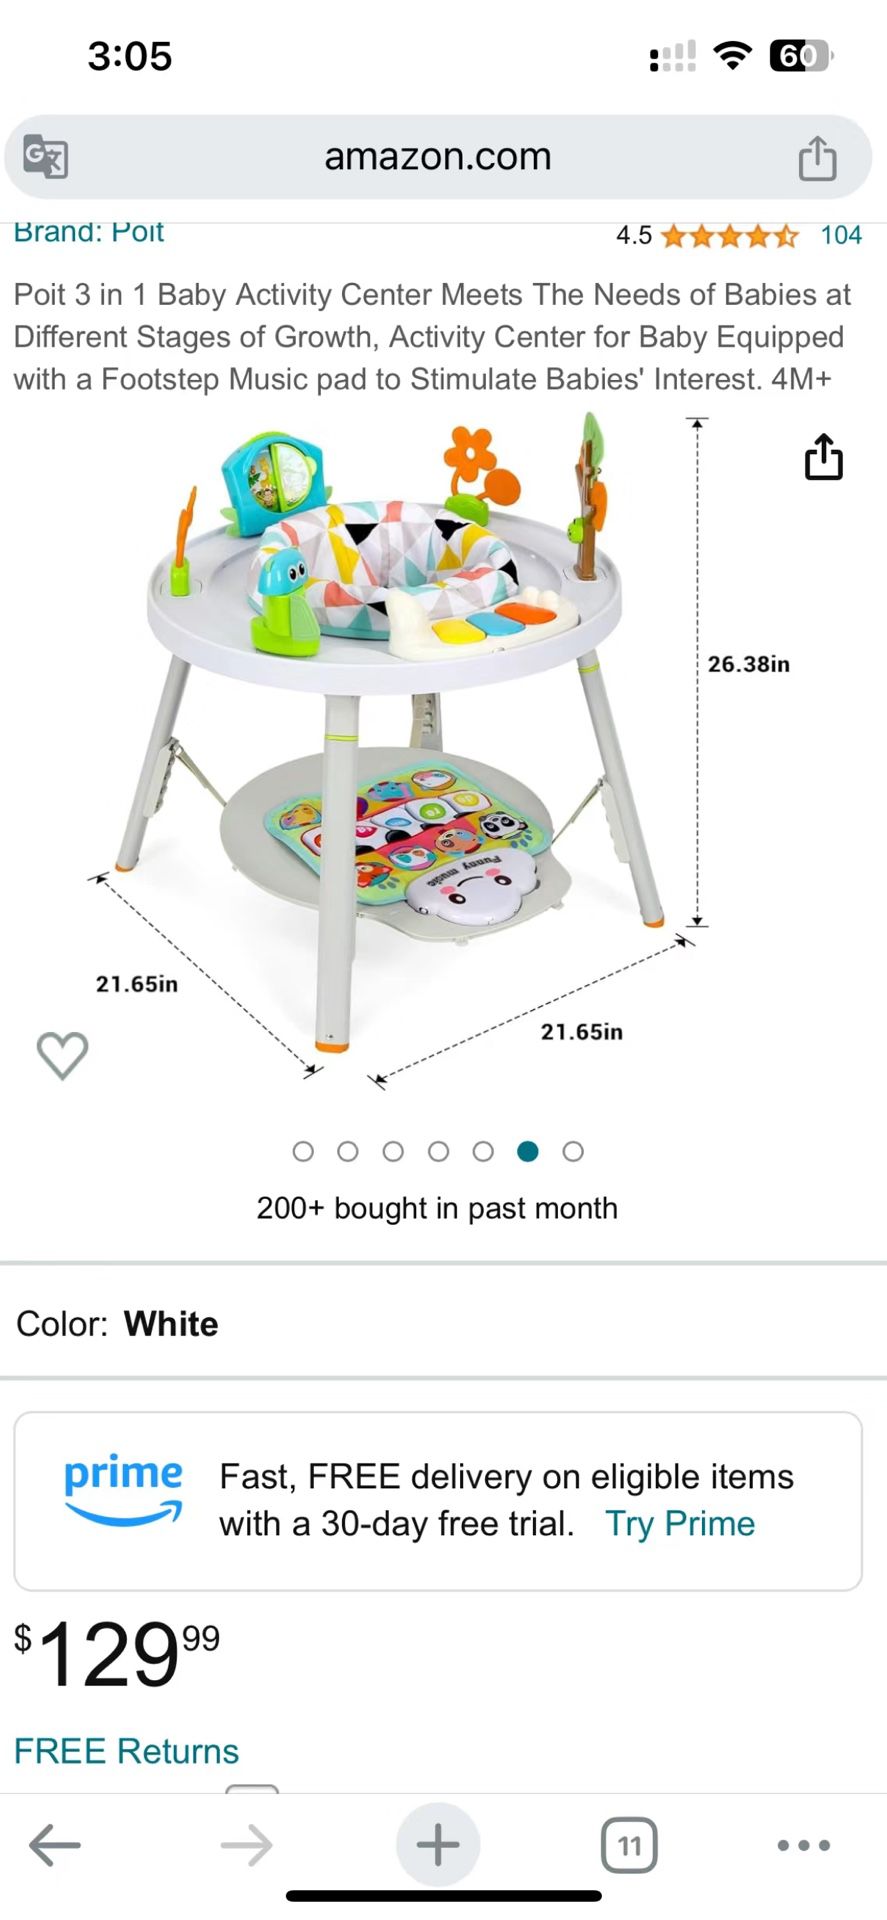 Poit 3 IN 1 Baby Activity Center Meets